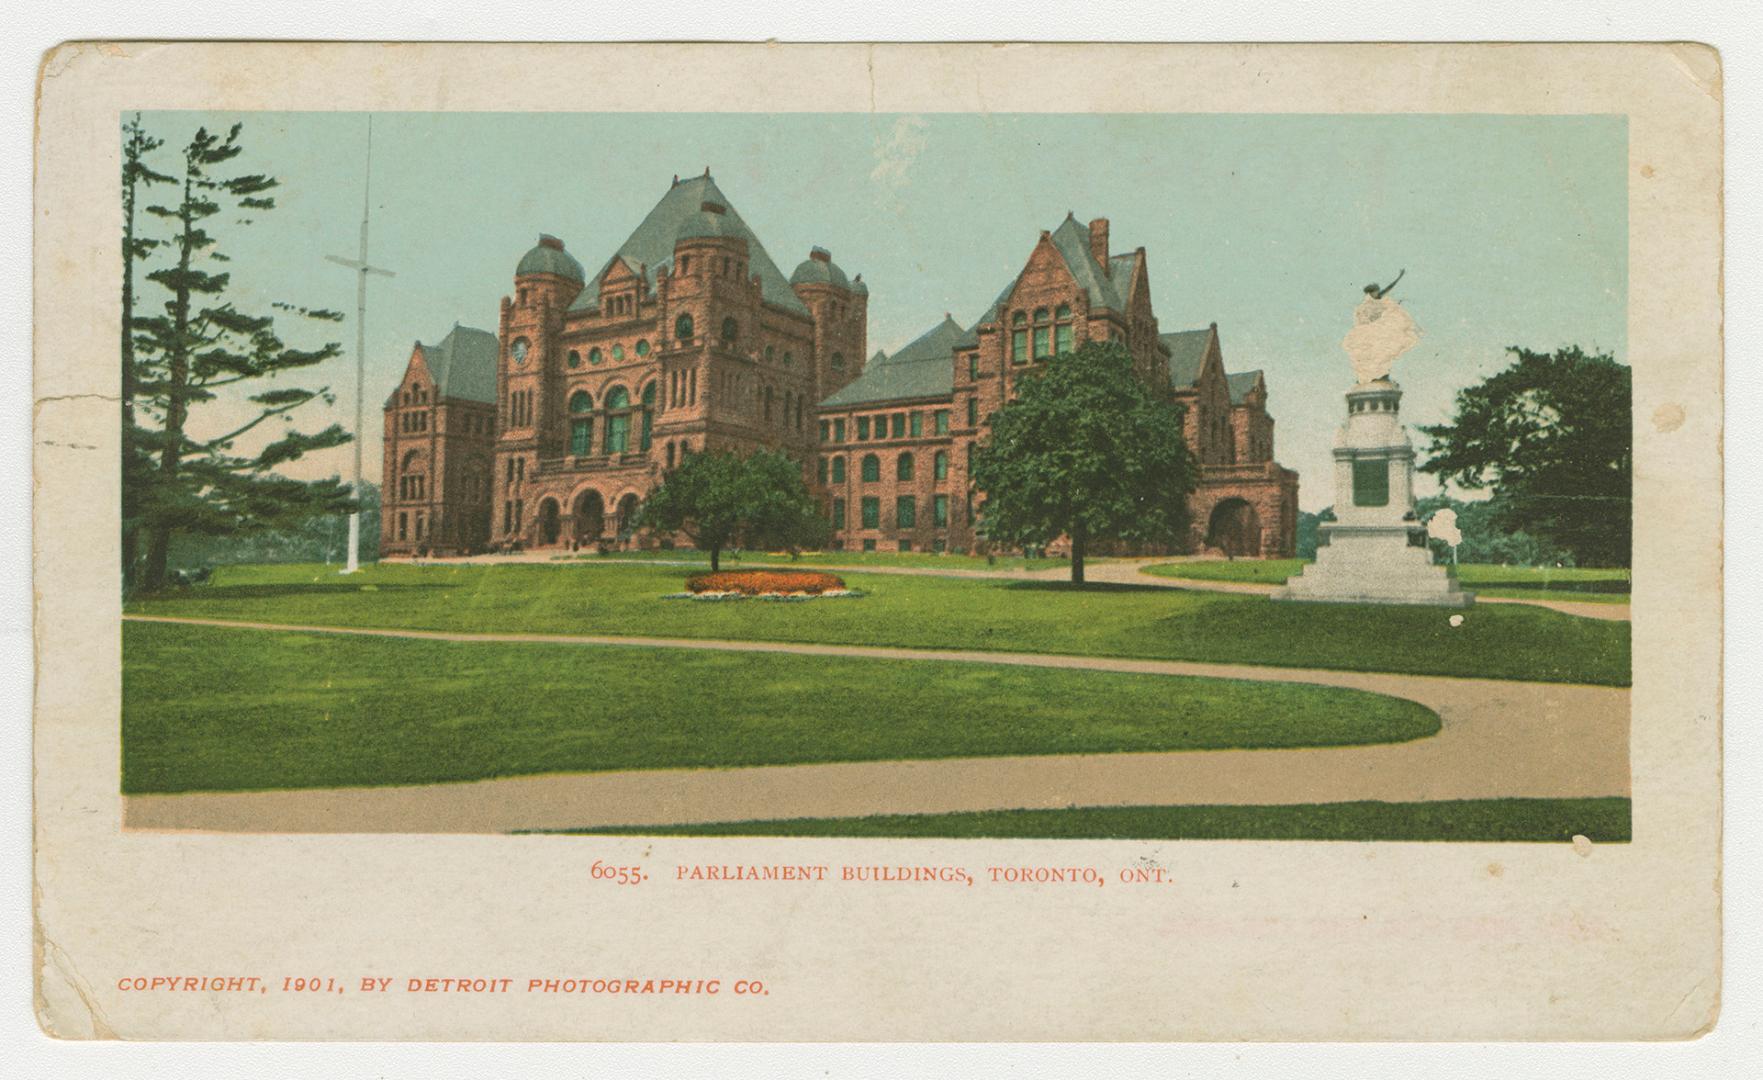 Colorized photograph a large government building in the Ricardsonian Romanesque style.